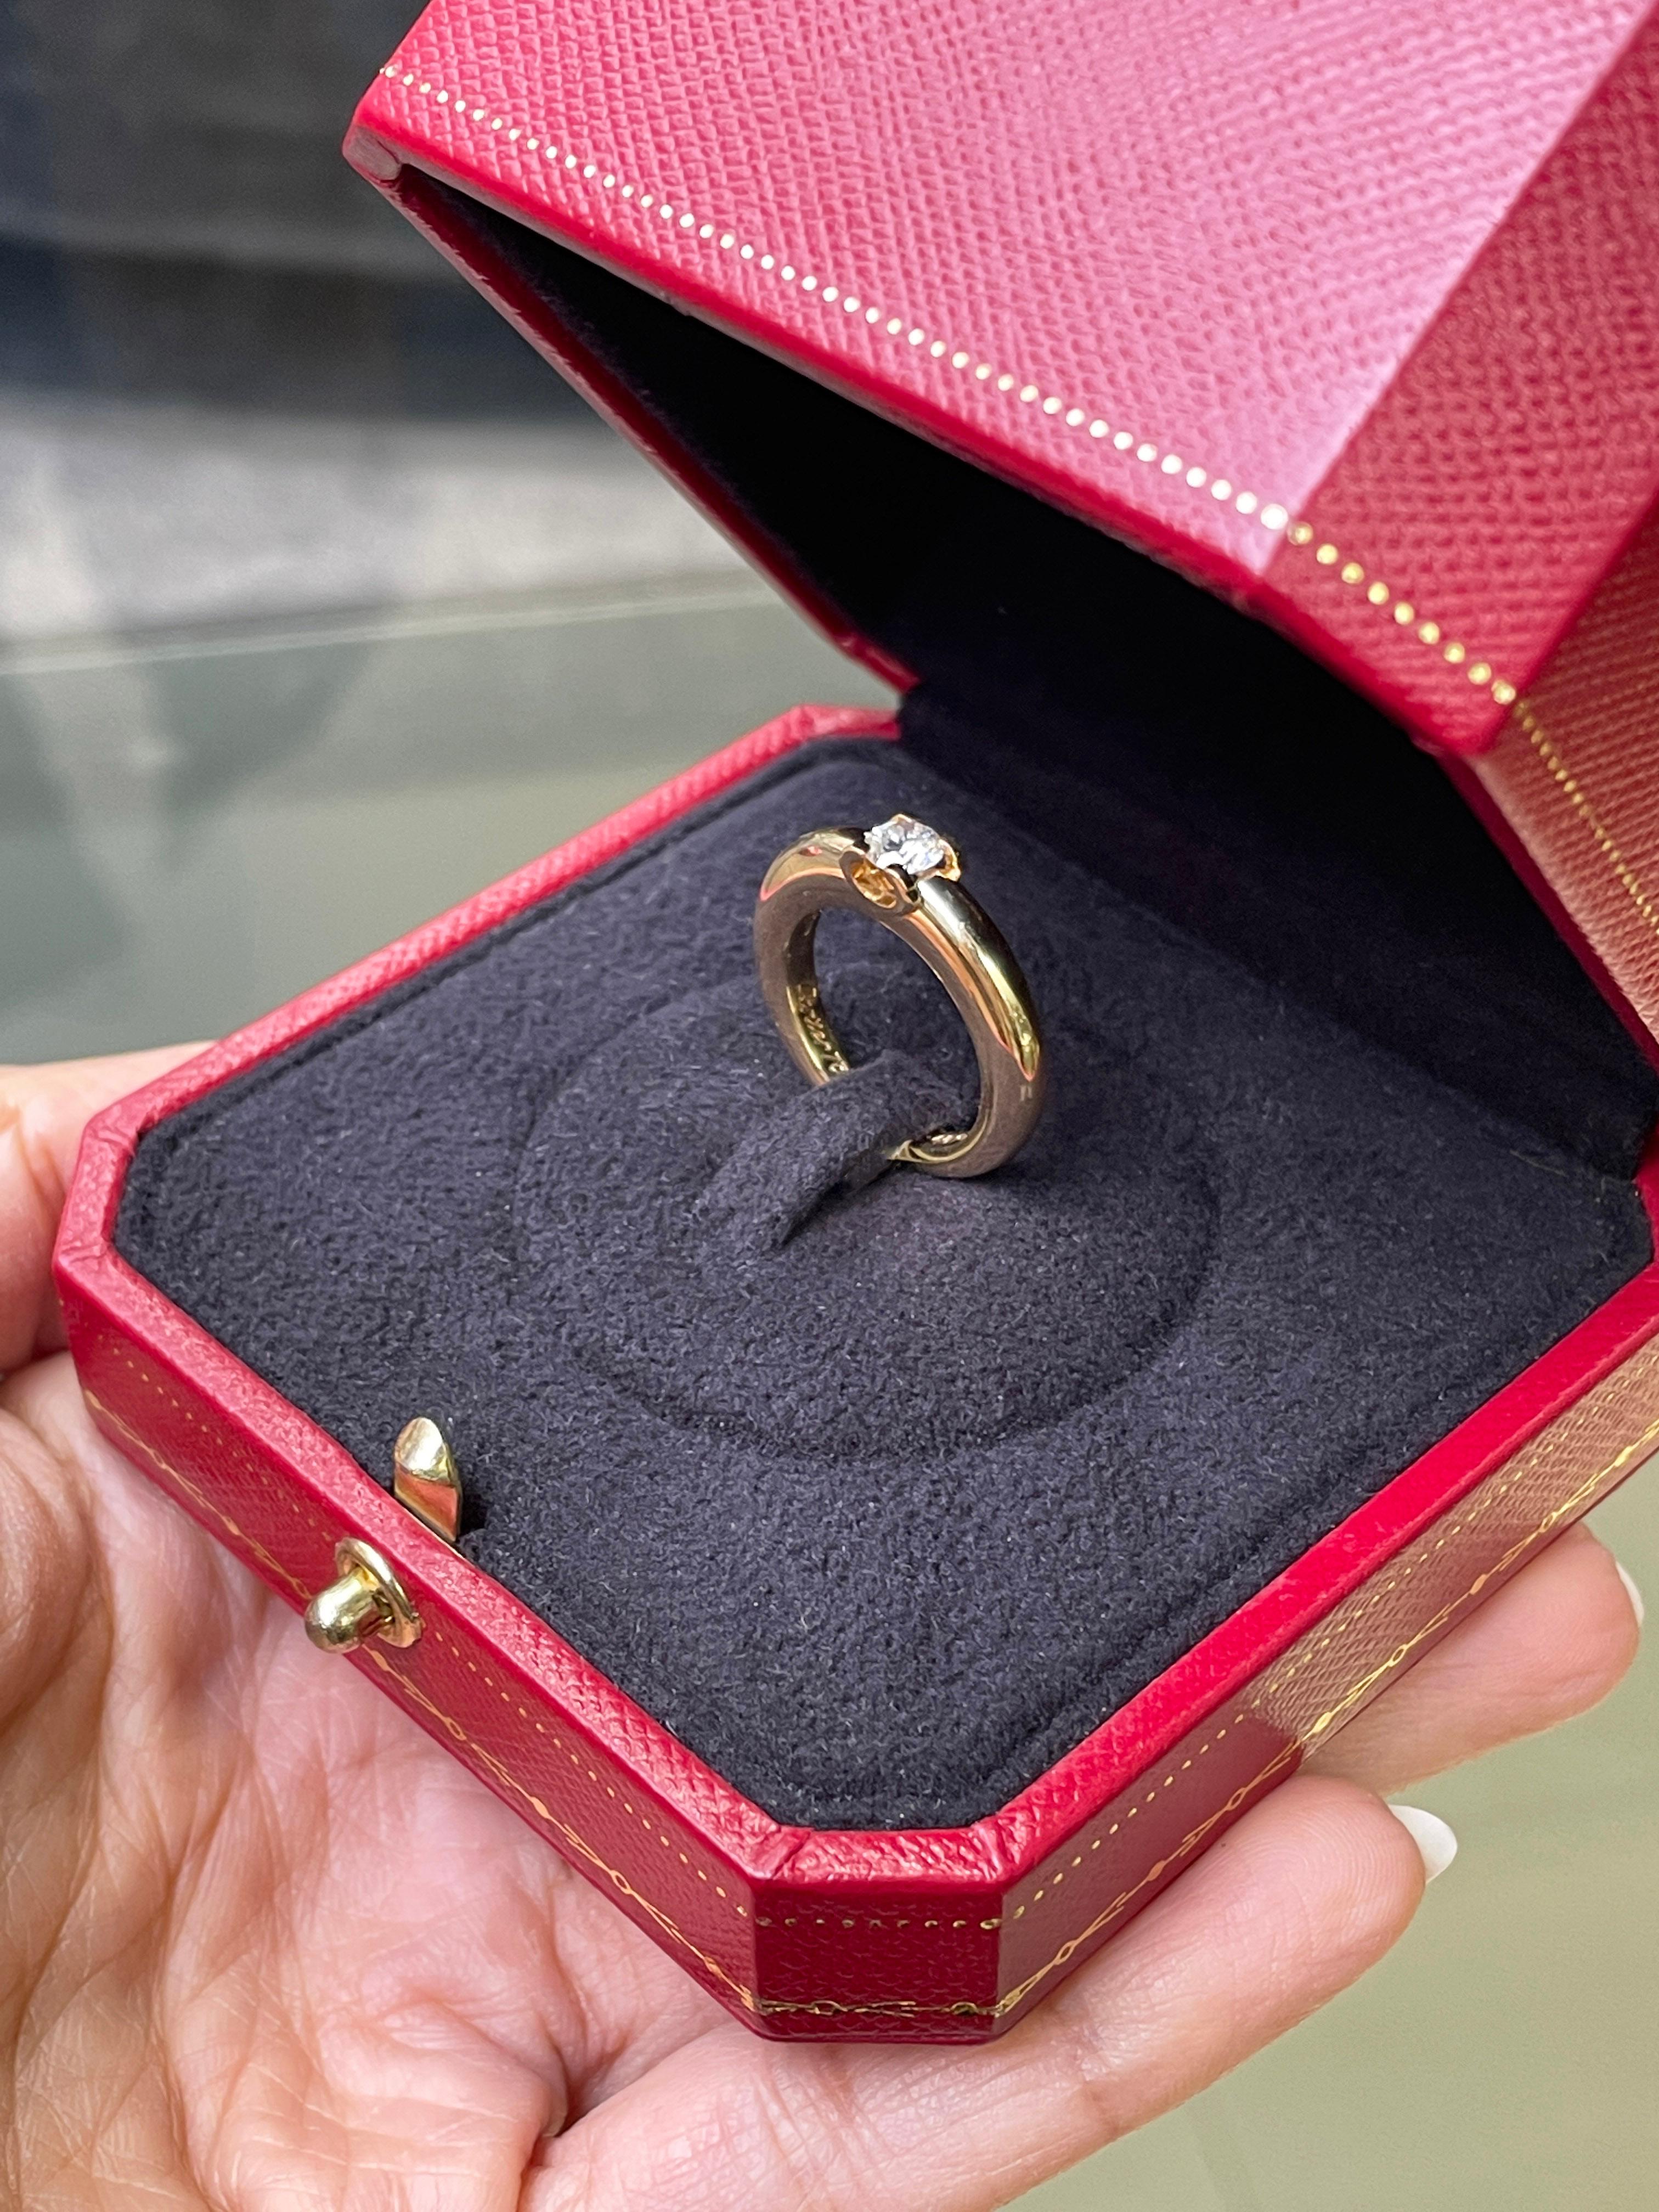 Cartier 'C de Cartier' 18 Carat Yellow Gold Diamond Solitaire Engagement Ring In Excellent Condition For Sale In London, GB